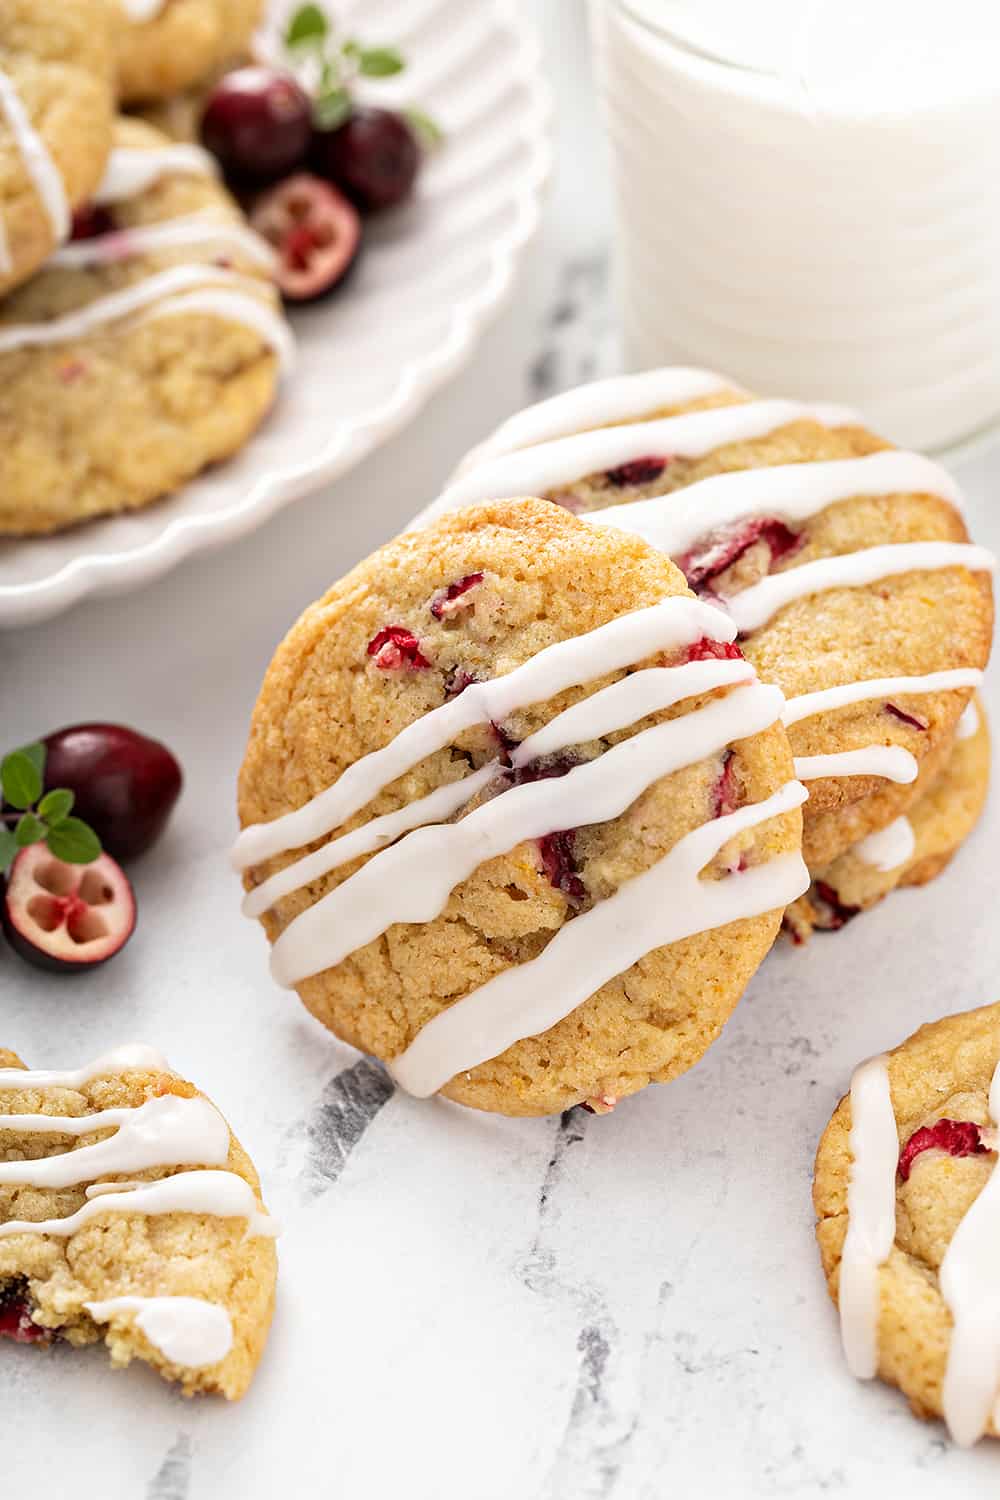 10 Best Cookie Baking Tools - Sally's Baking Addiction